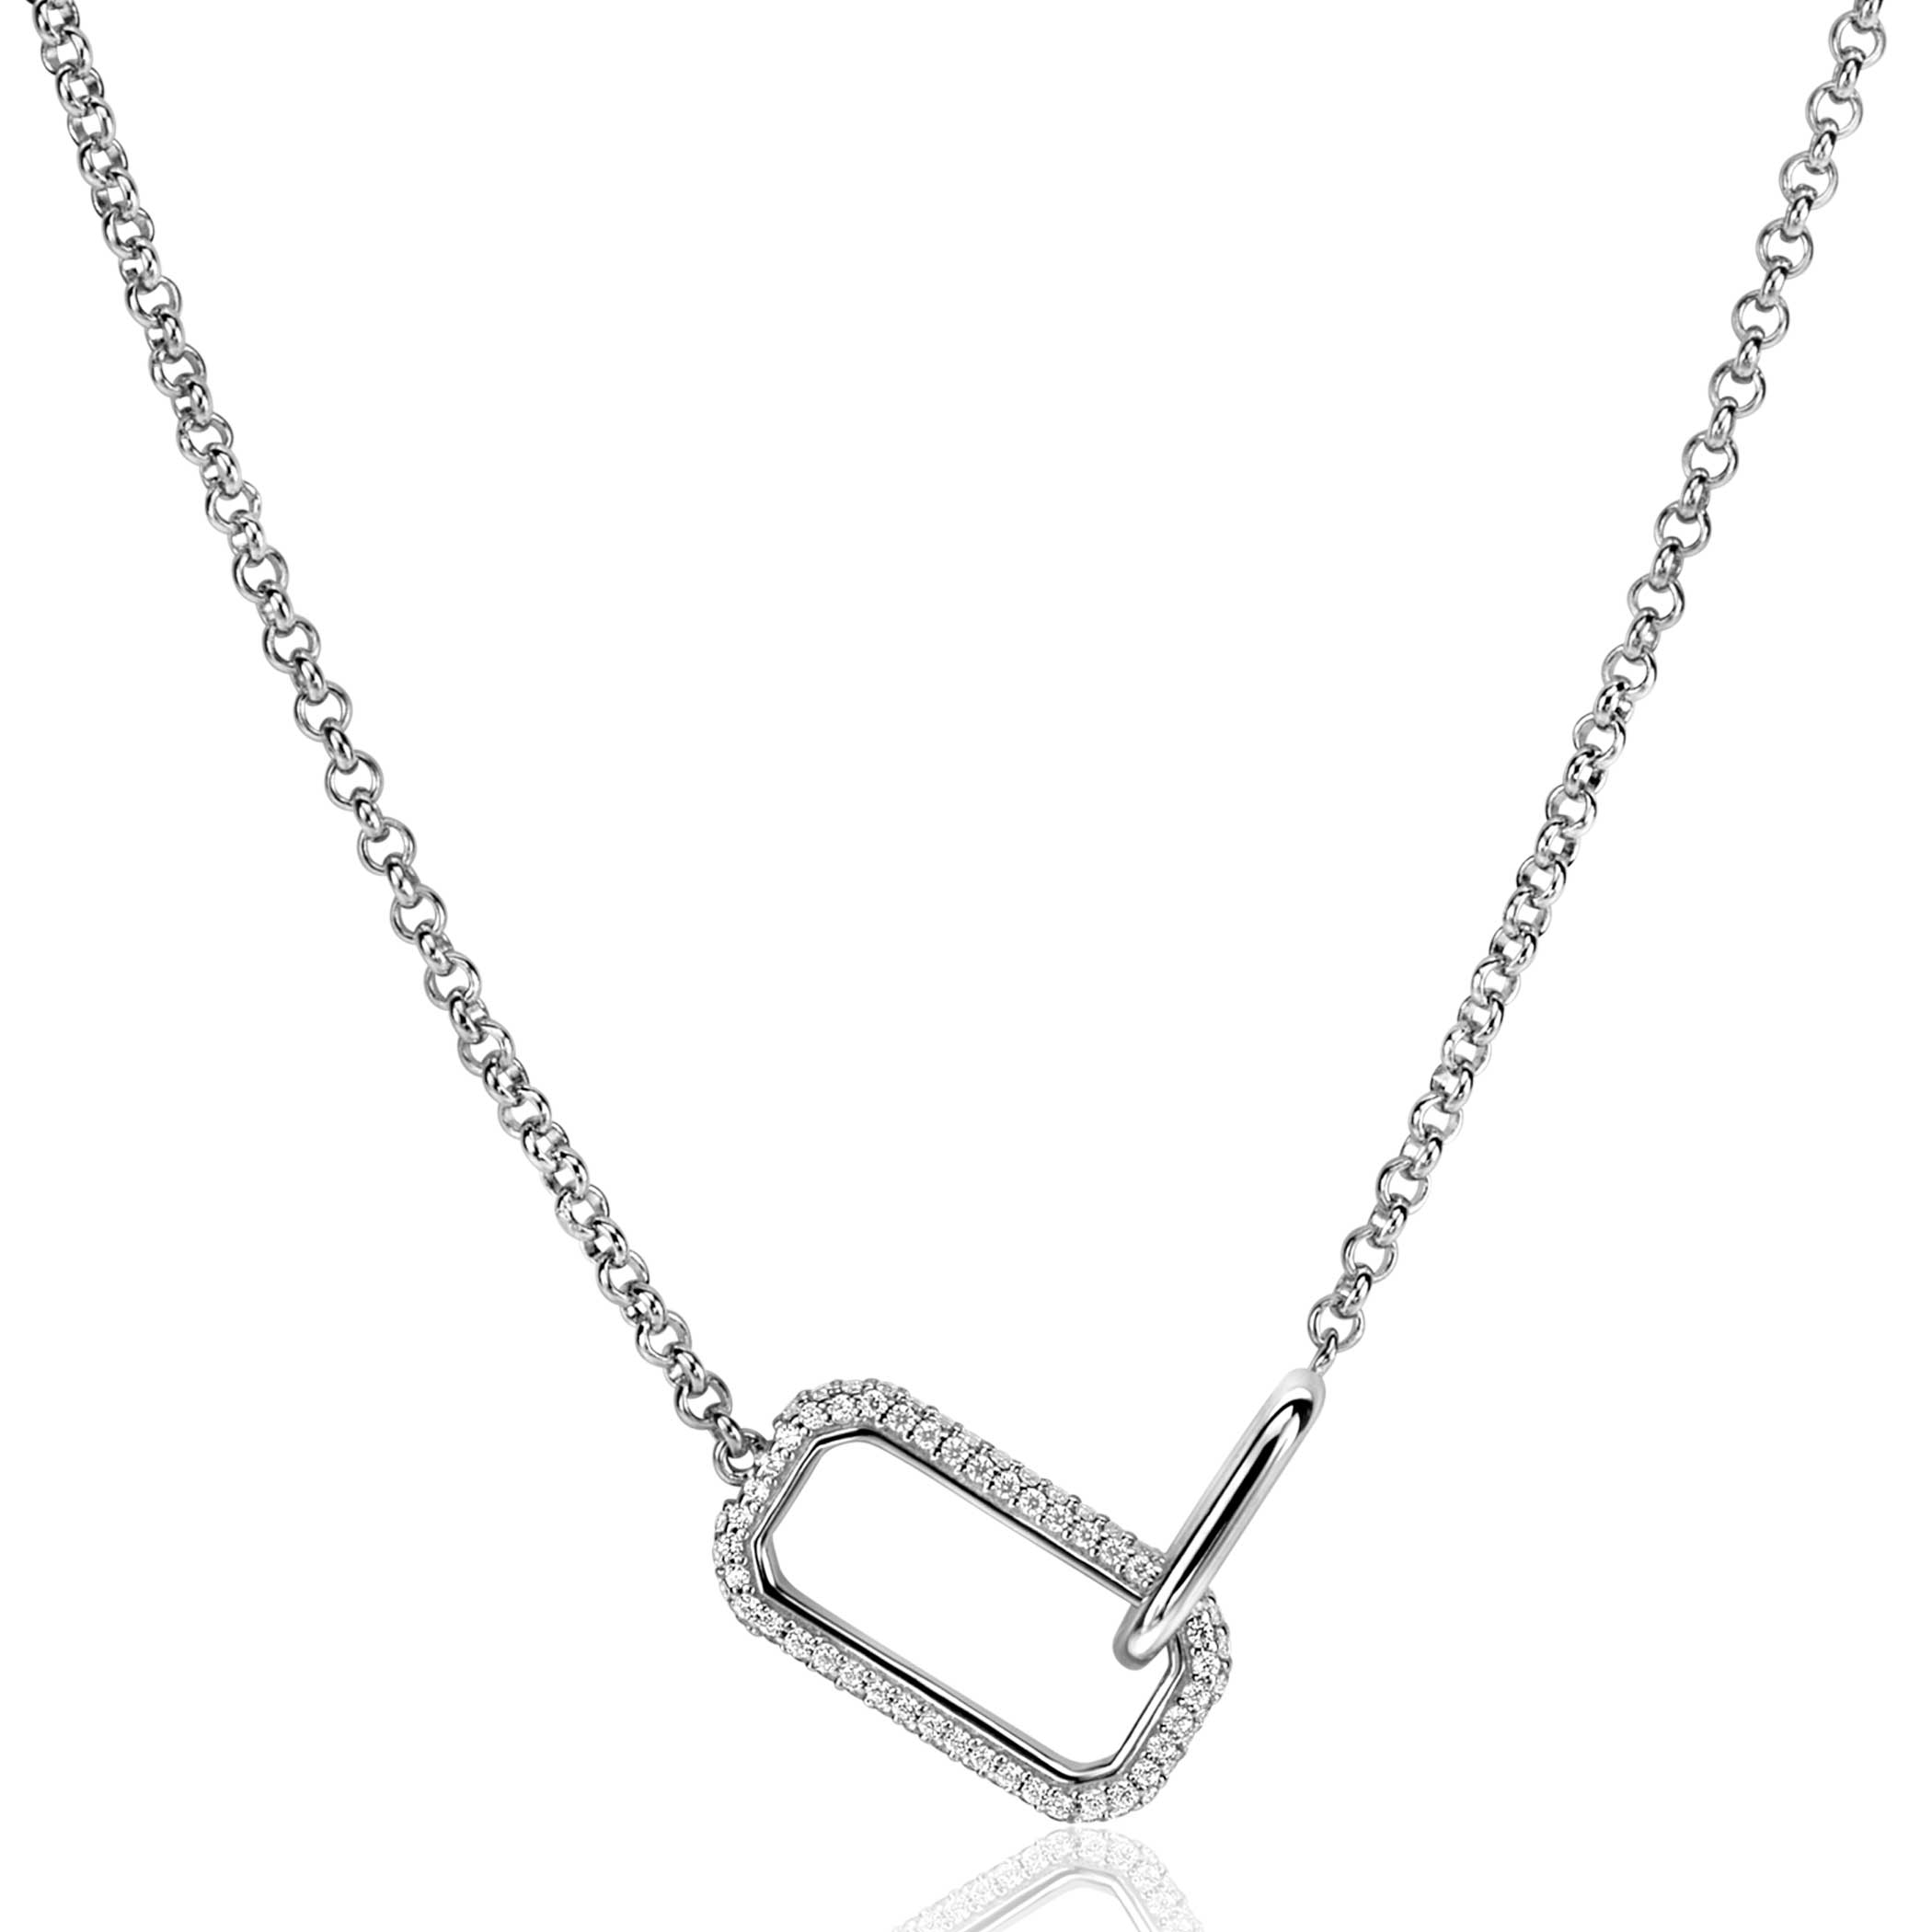 ZINZI Sterling Silver Necklace with 2 Connected Chains: a Rectangular Chain Set with White Zirconias and a Shiny Oval Chain 40-45cm ZIC2551